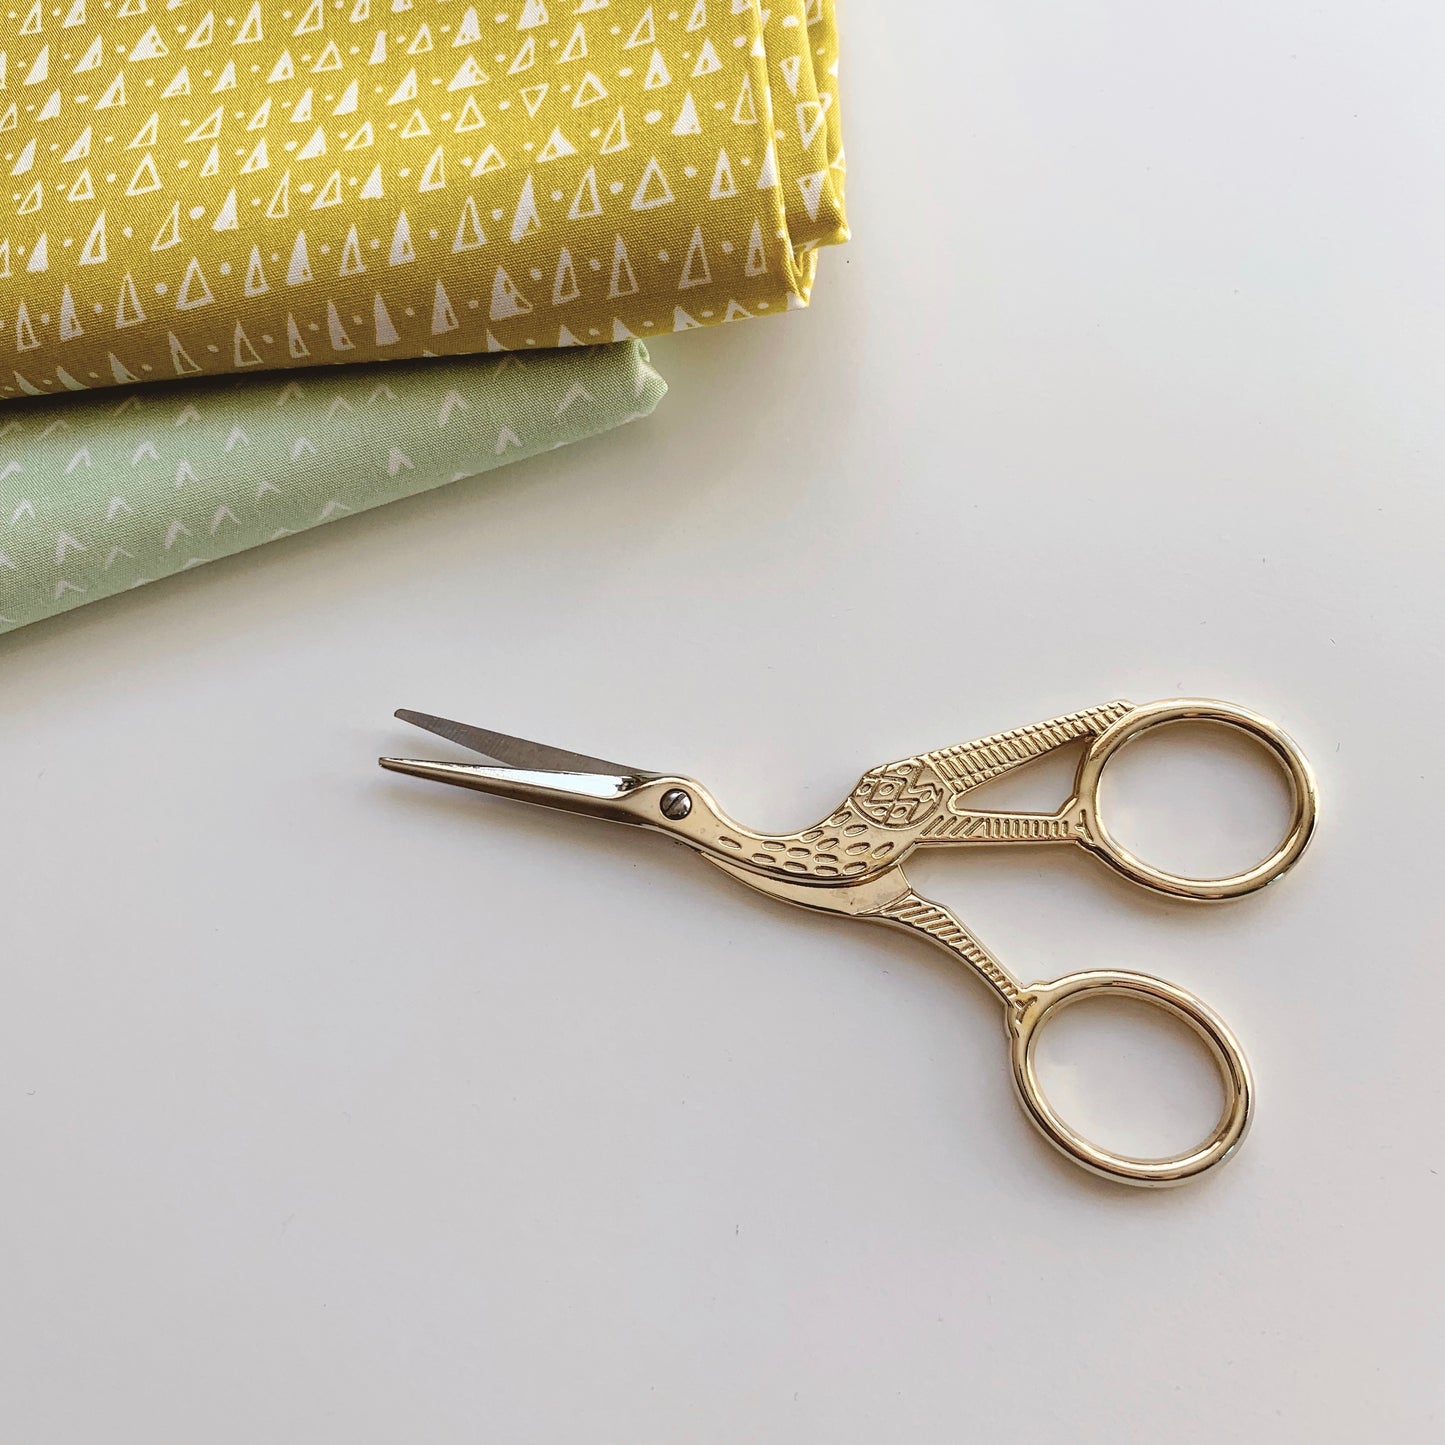 Gold Stork Antique Style Stainless Steel Embroidery Scissors